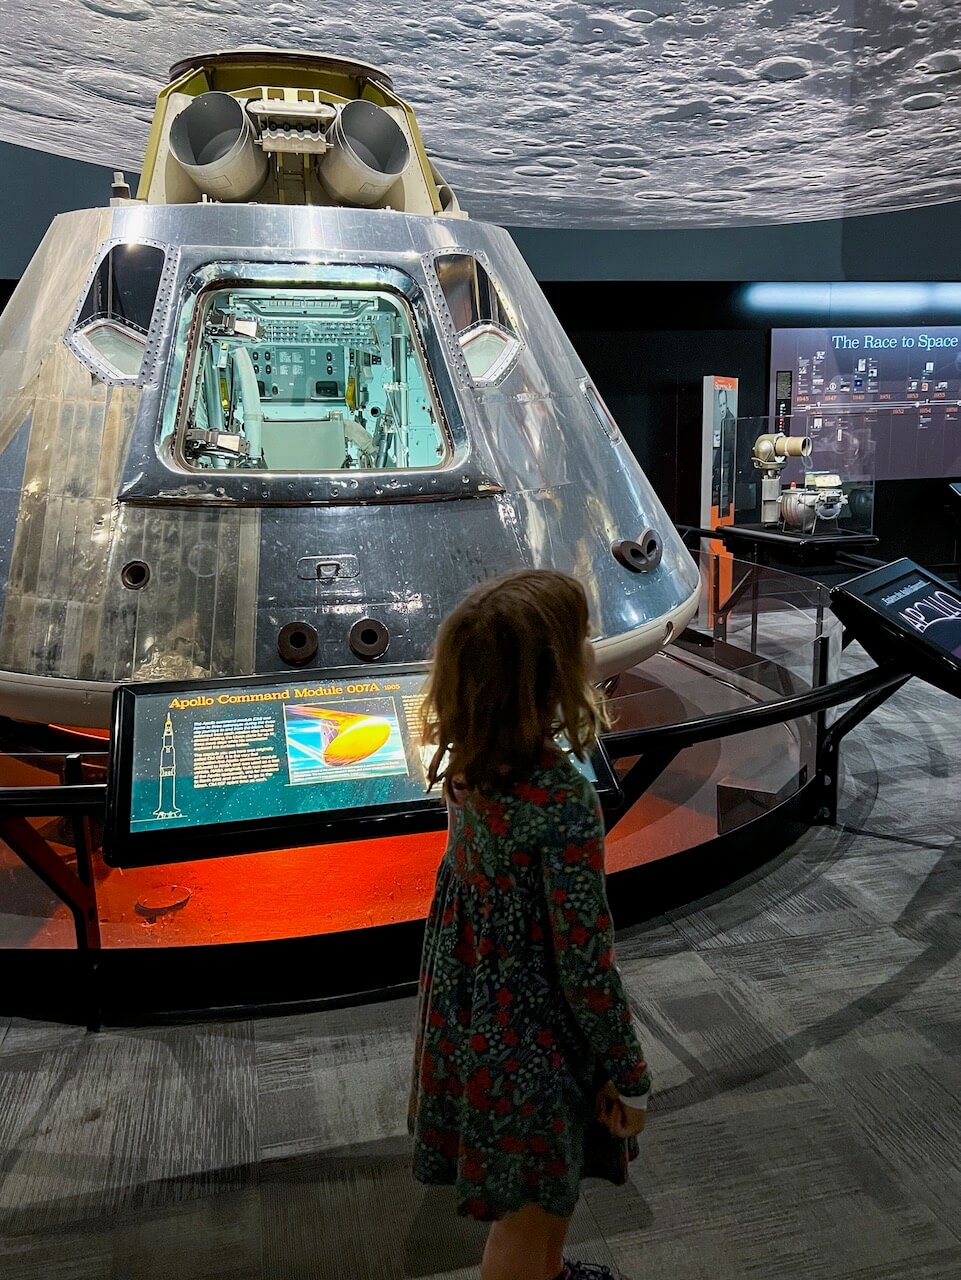 A family favorite for us was wandering the lunar exhibits, complete with an Apollo lunar lander and landing module.